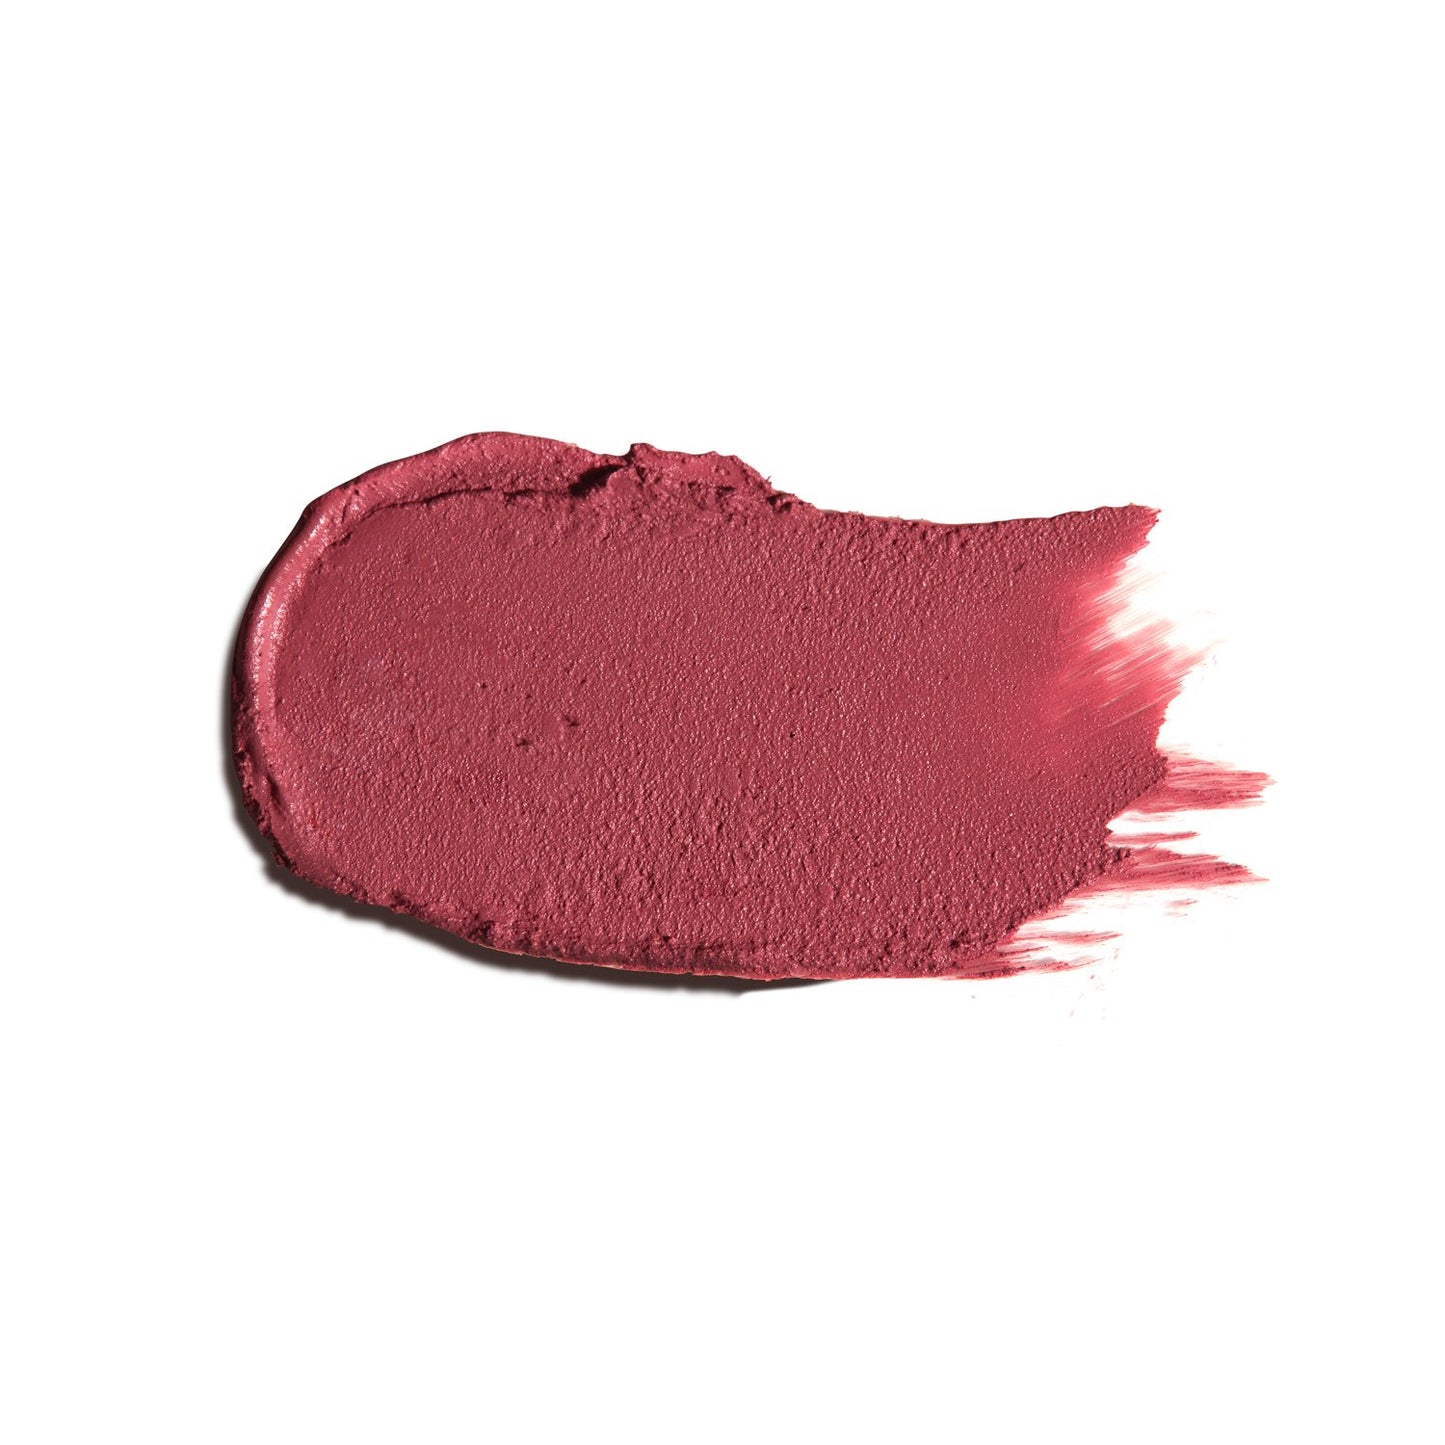 Ogee Full Bloom Sculpted Lipstick Baccara